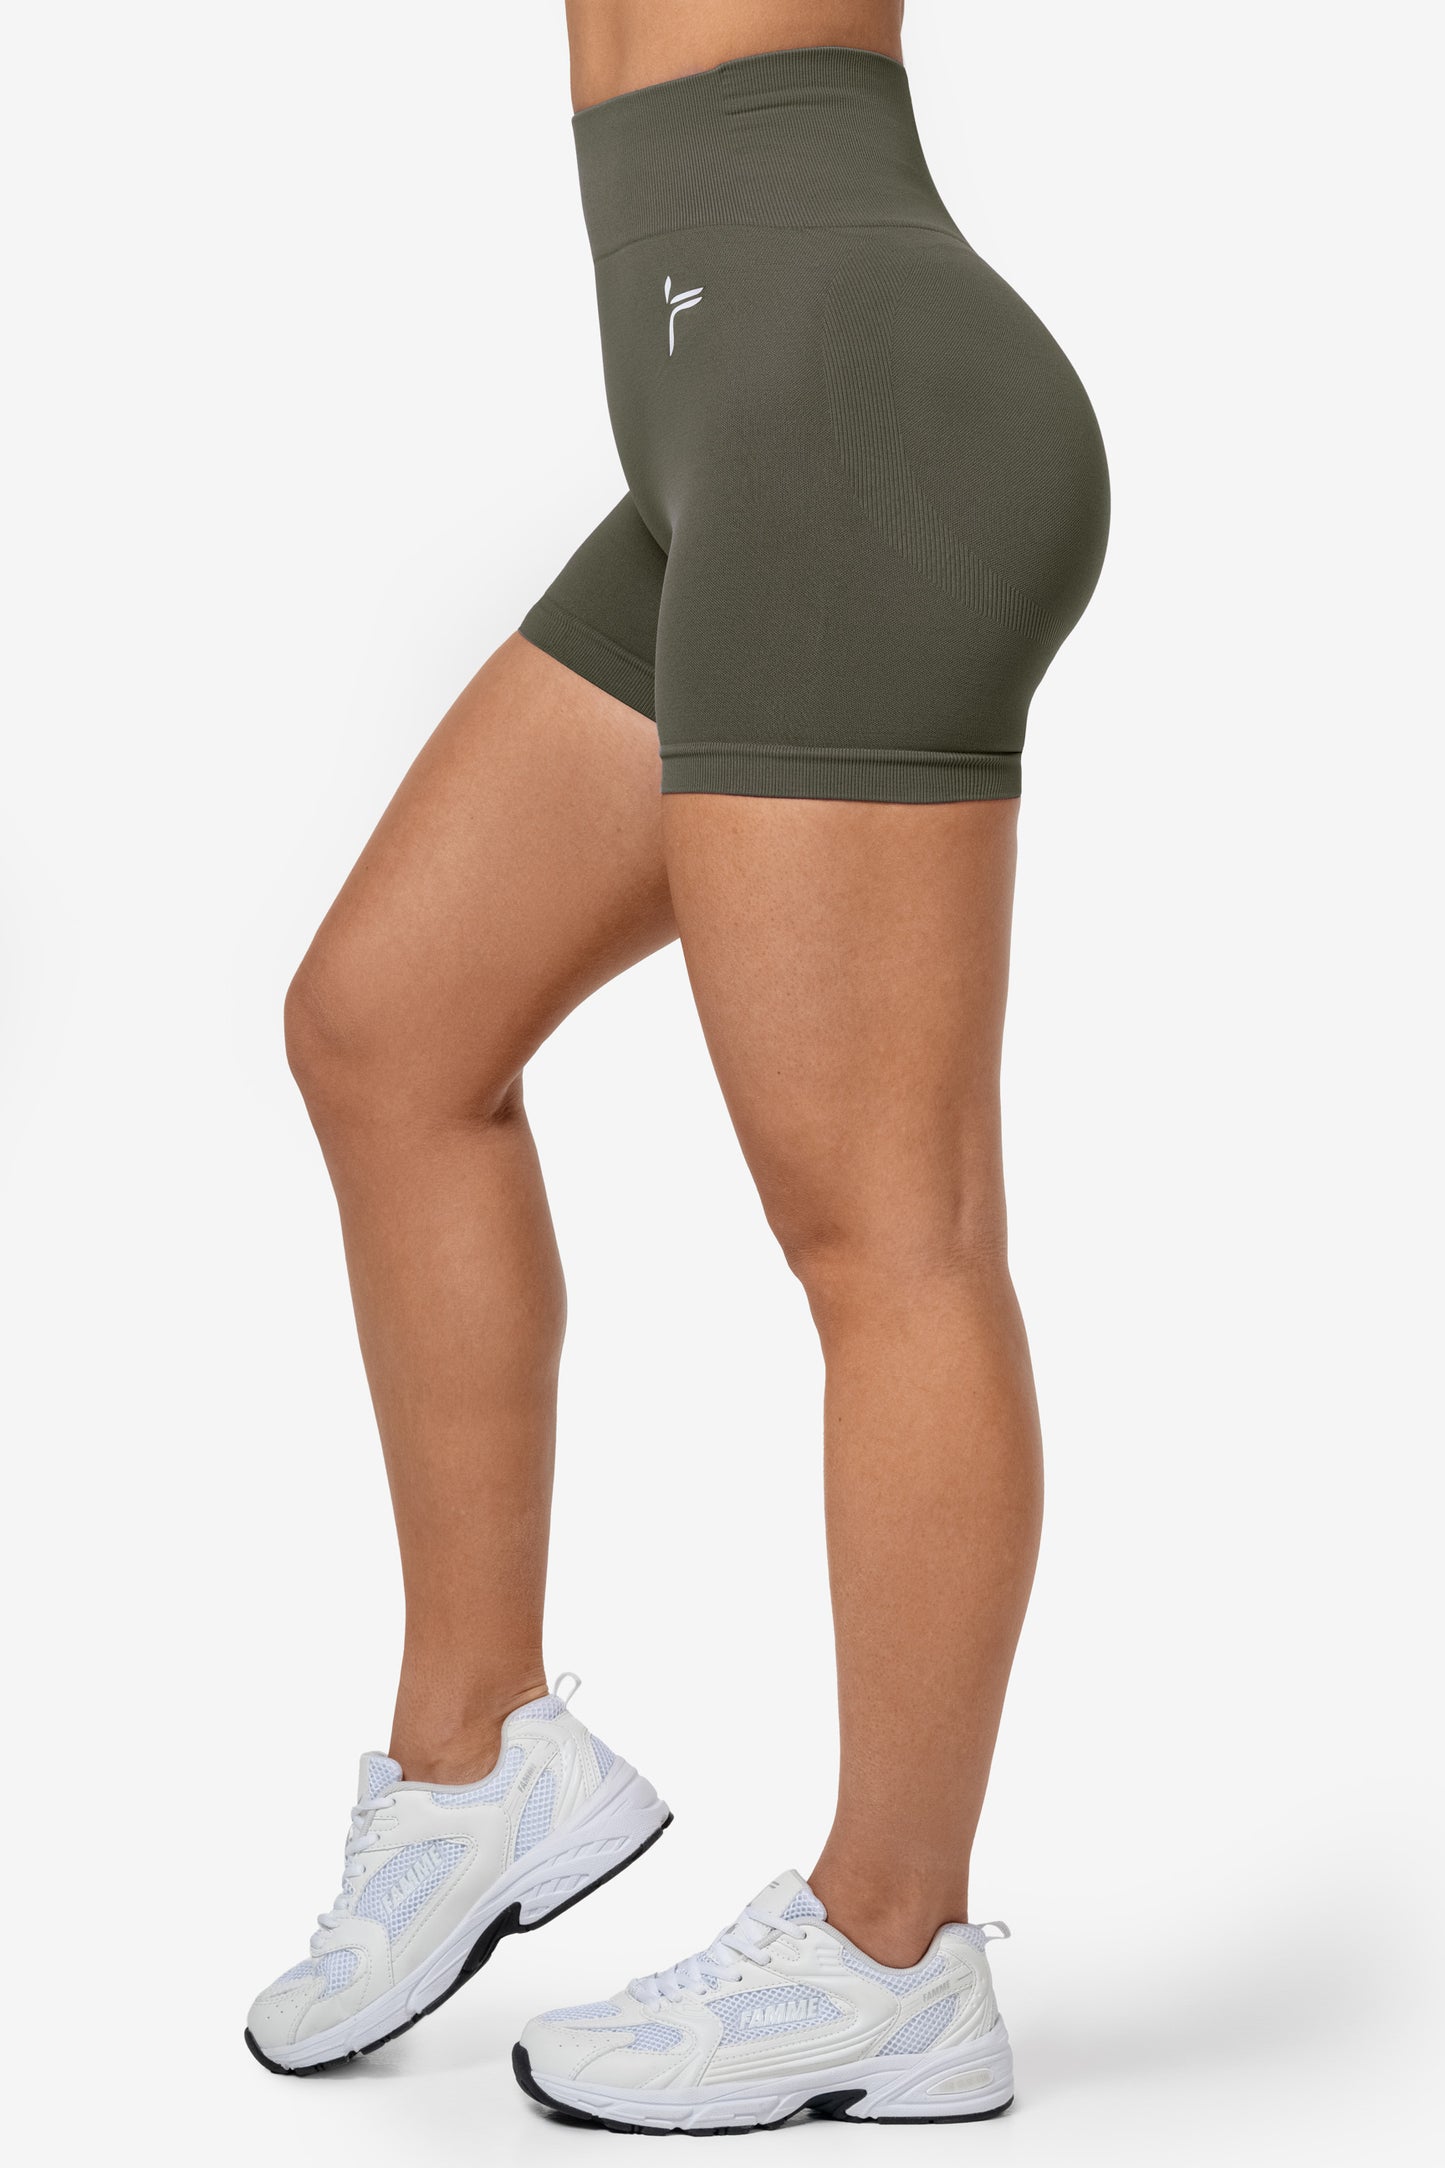 Green Lunge Scrunch Shorts - for dame - Famme - Shorts